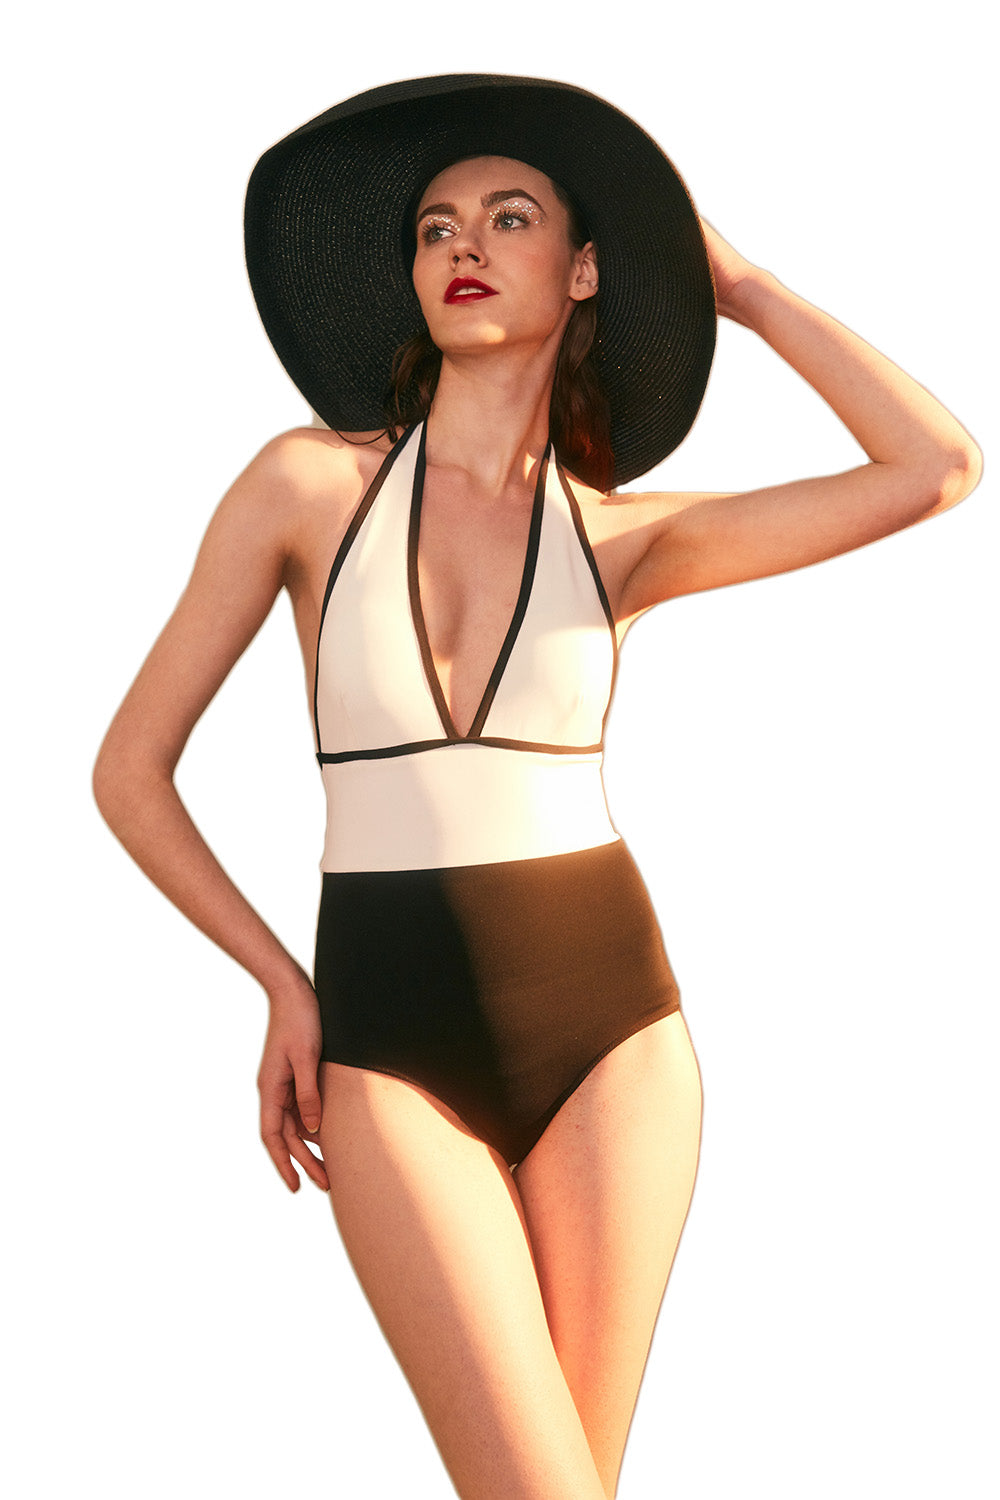 Black-And-White High-Waist Swimsuit